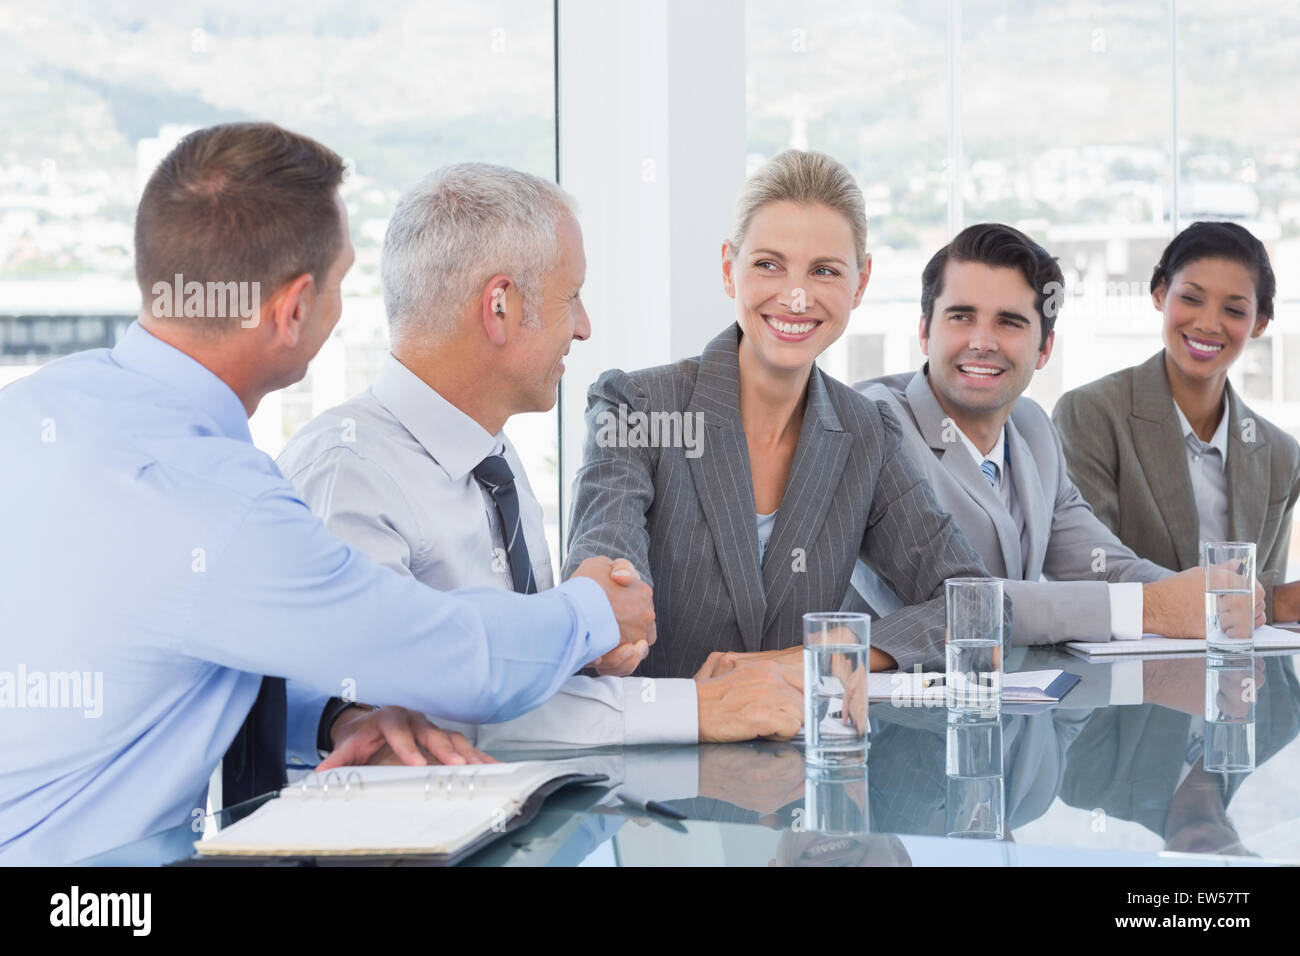 Business people shaking their hands Stock Photo